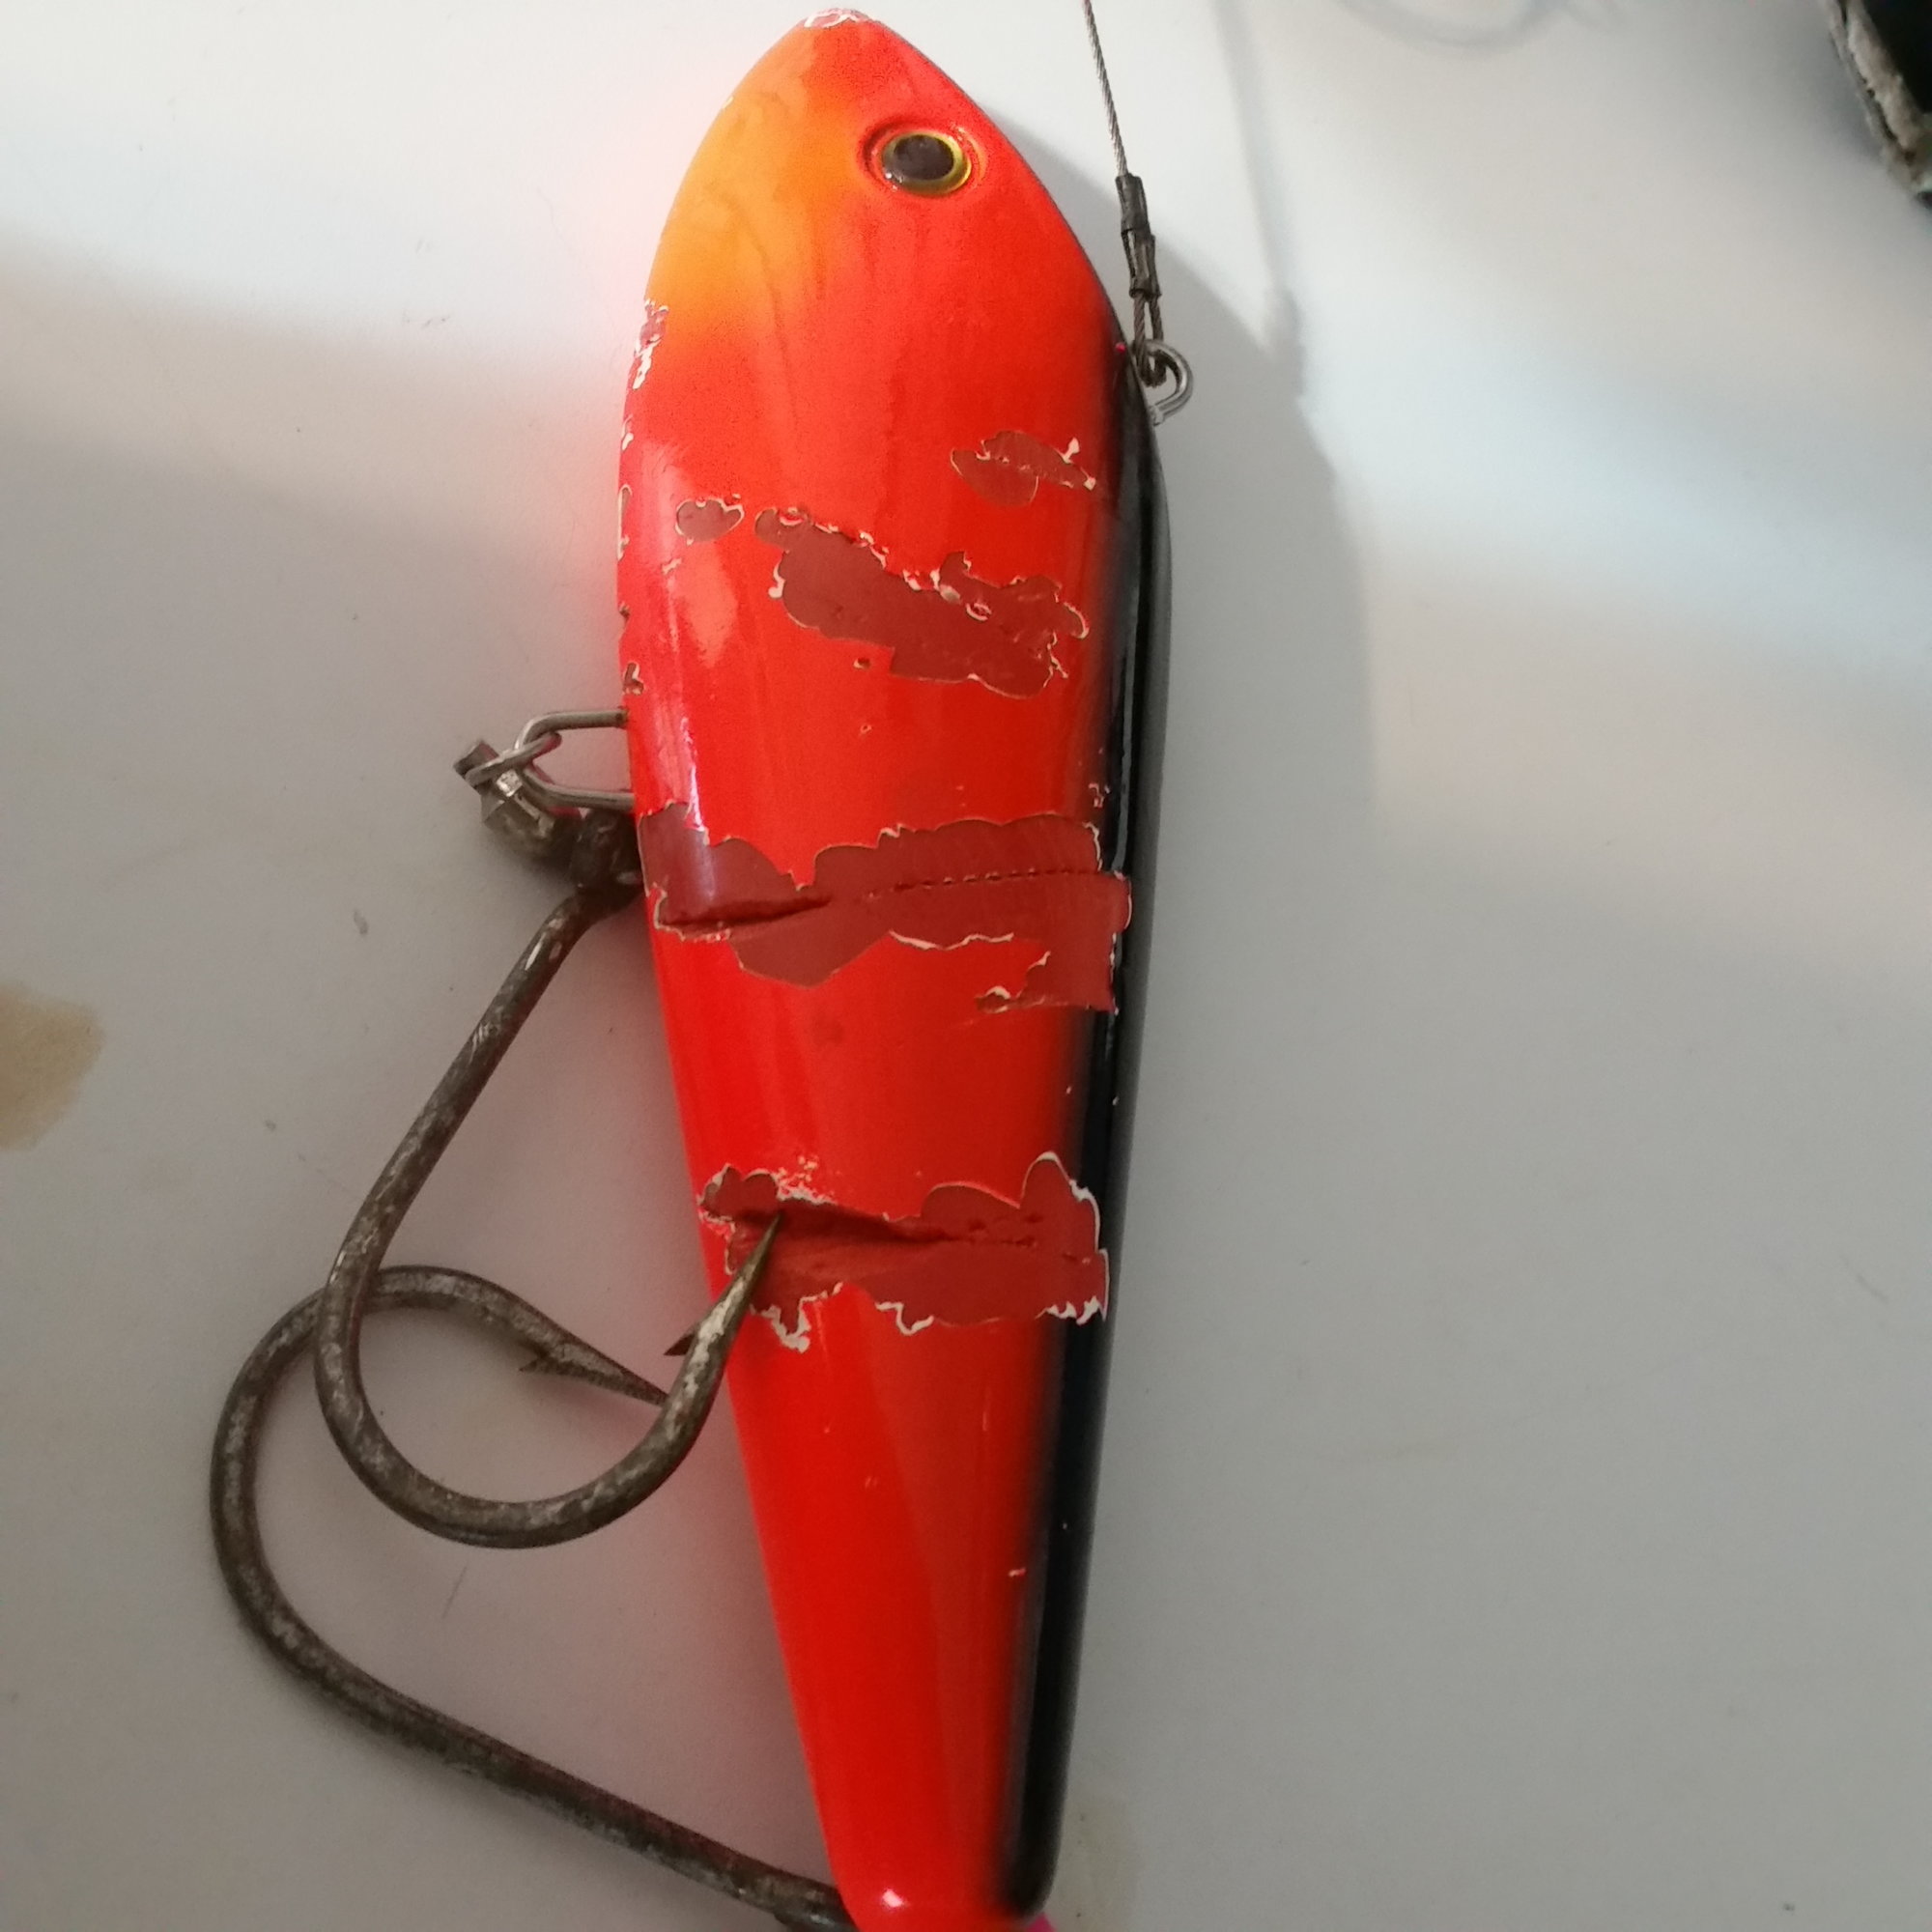 In-line hooks - The Hull Truth - Boating and Fishing Forum